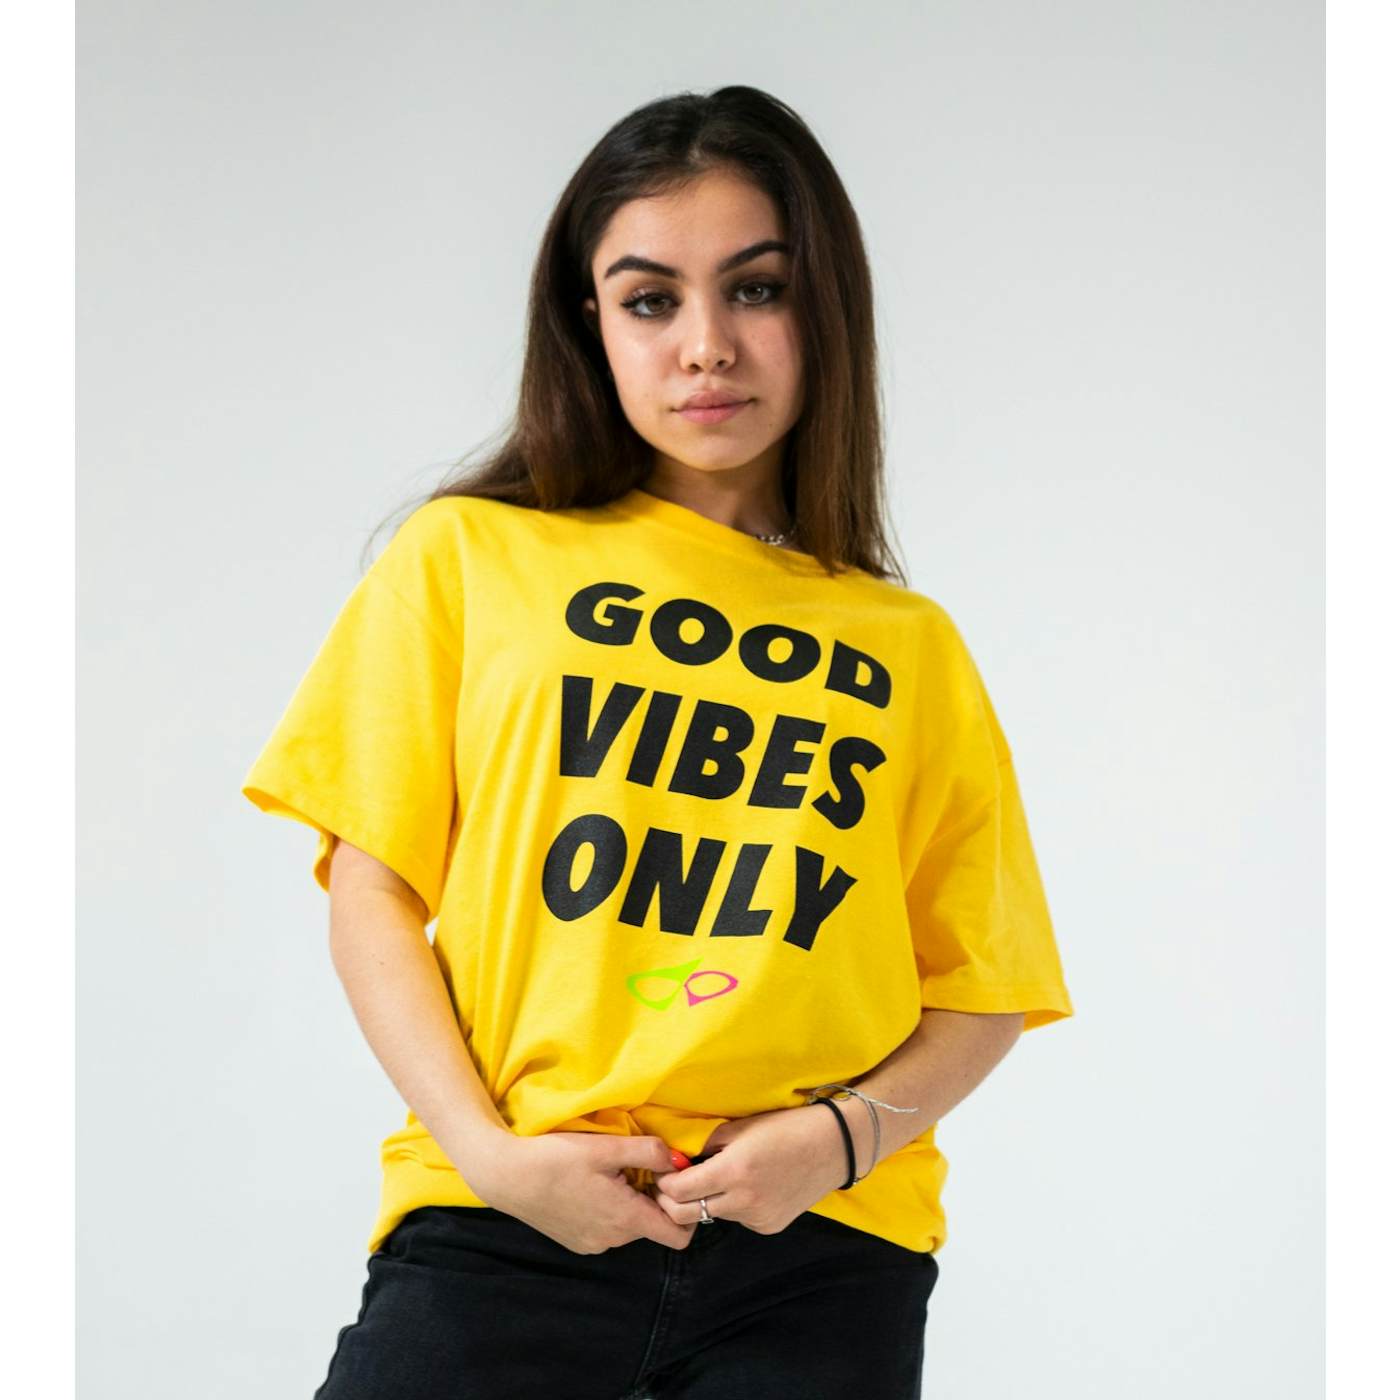 Roy Purdy Good Vibes Only Tee Yellow